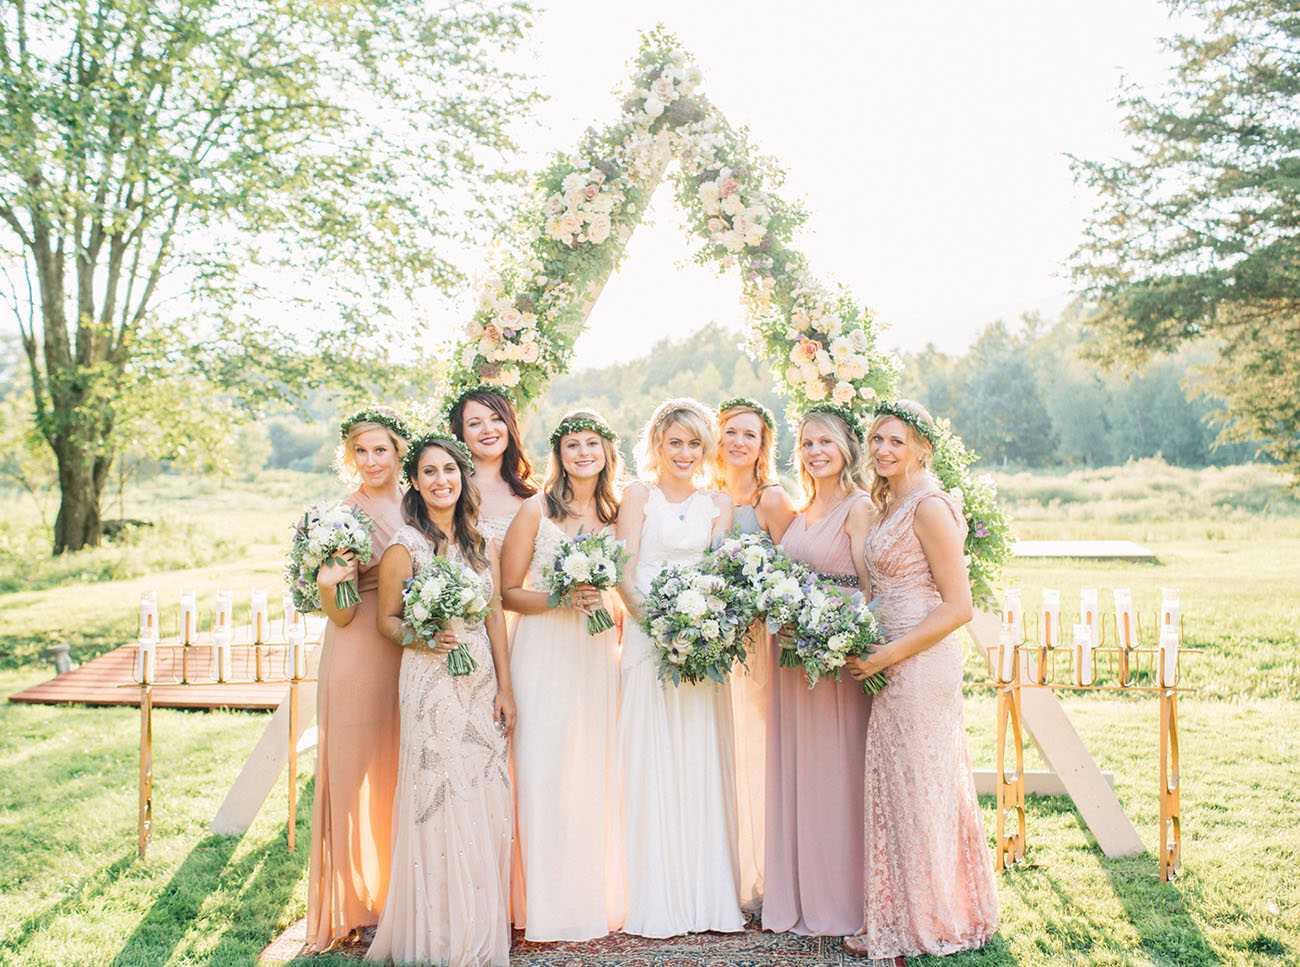 This gorgeous glam wedding was boho meets art deco and it took place in the mountains